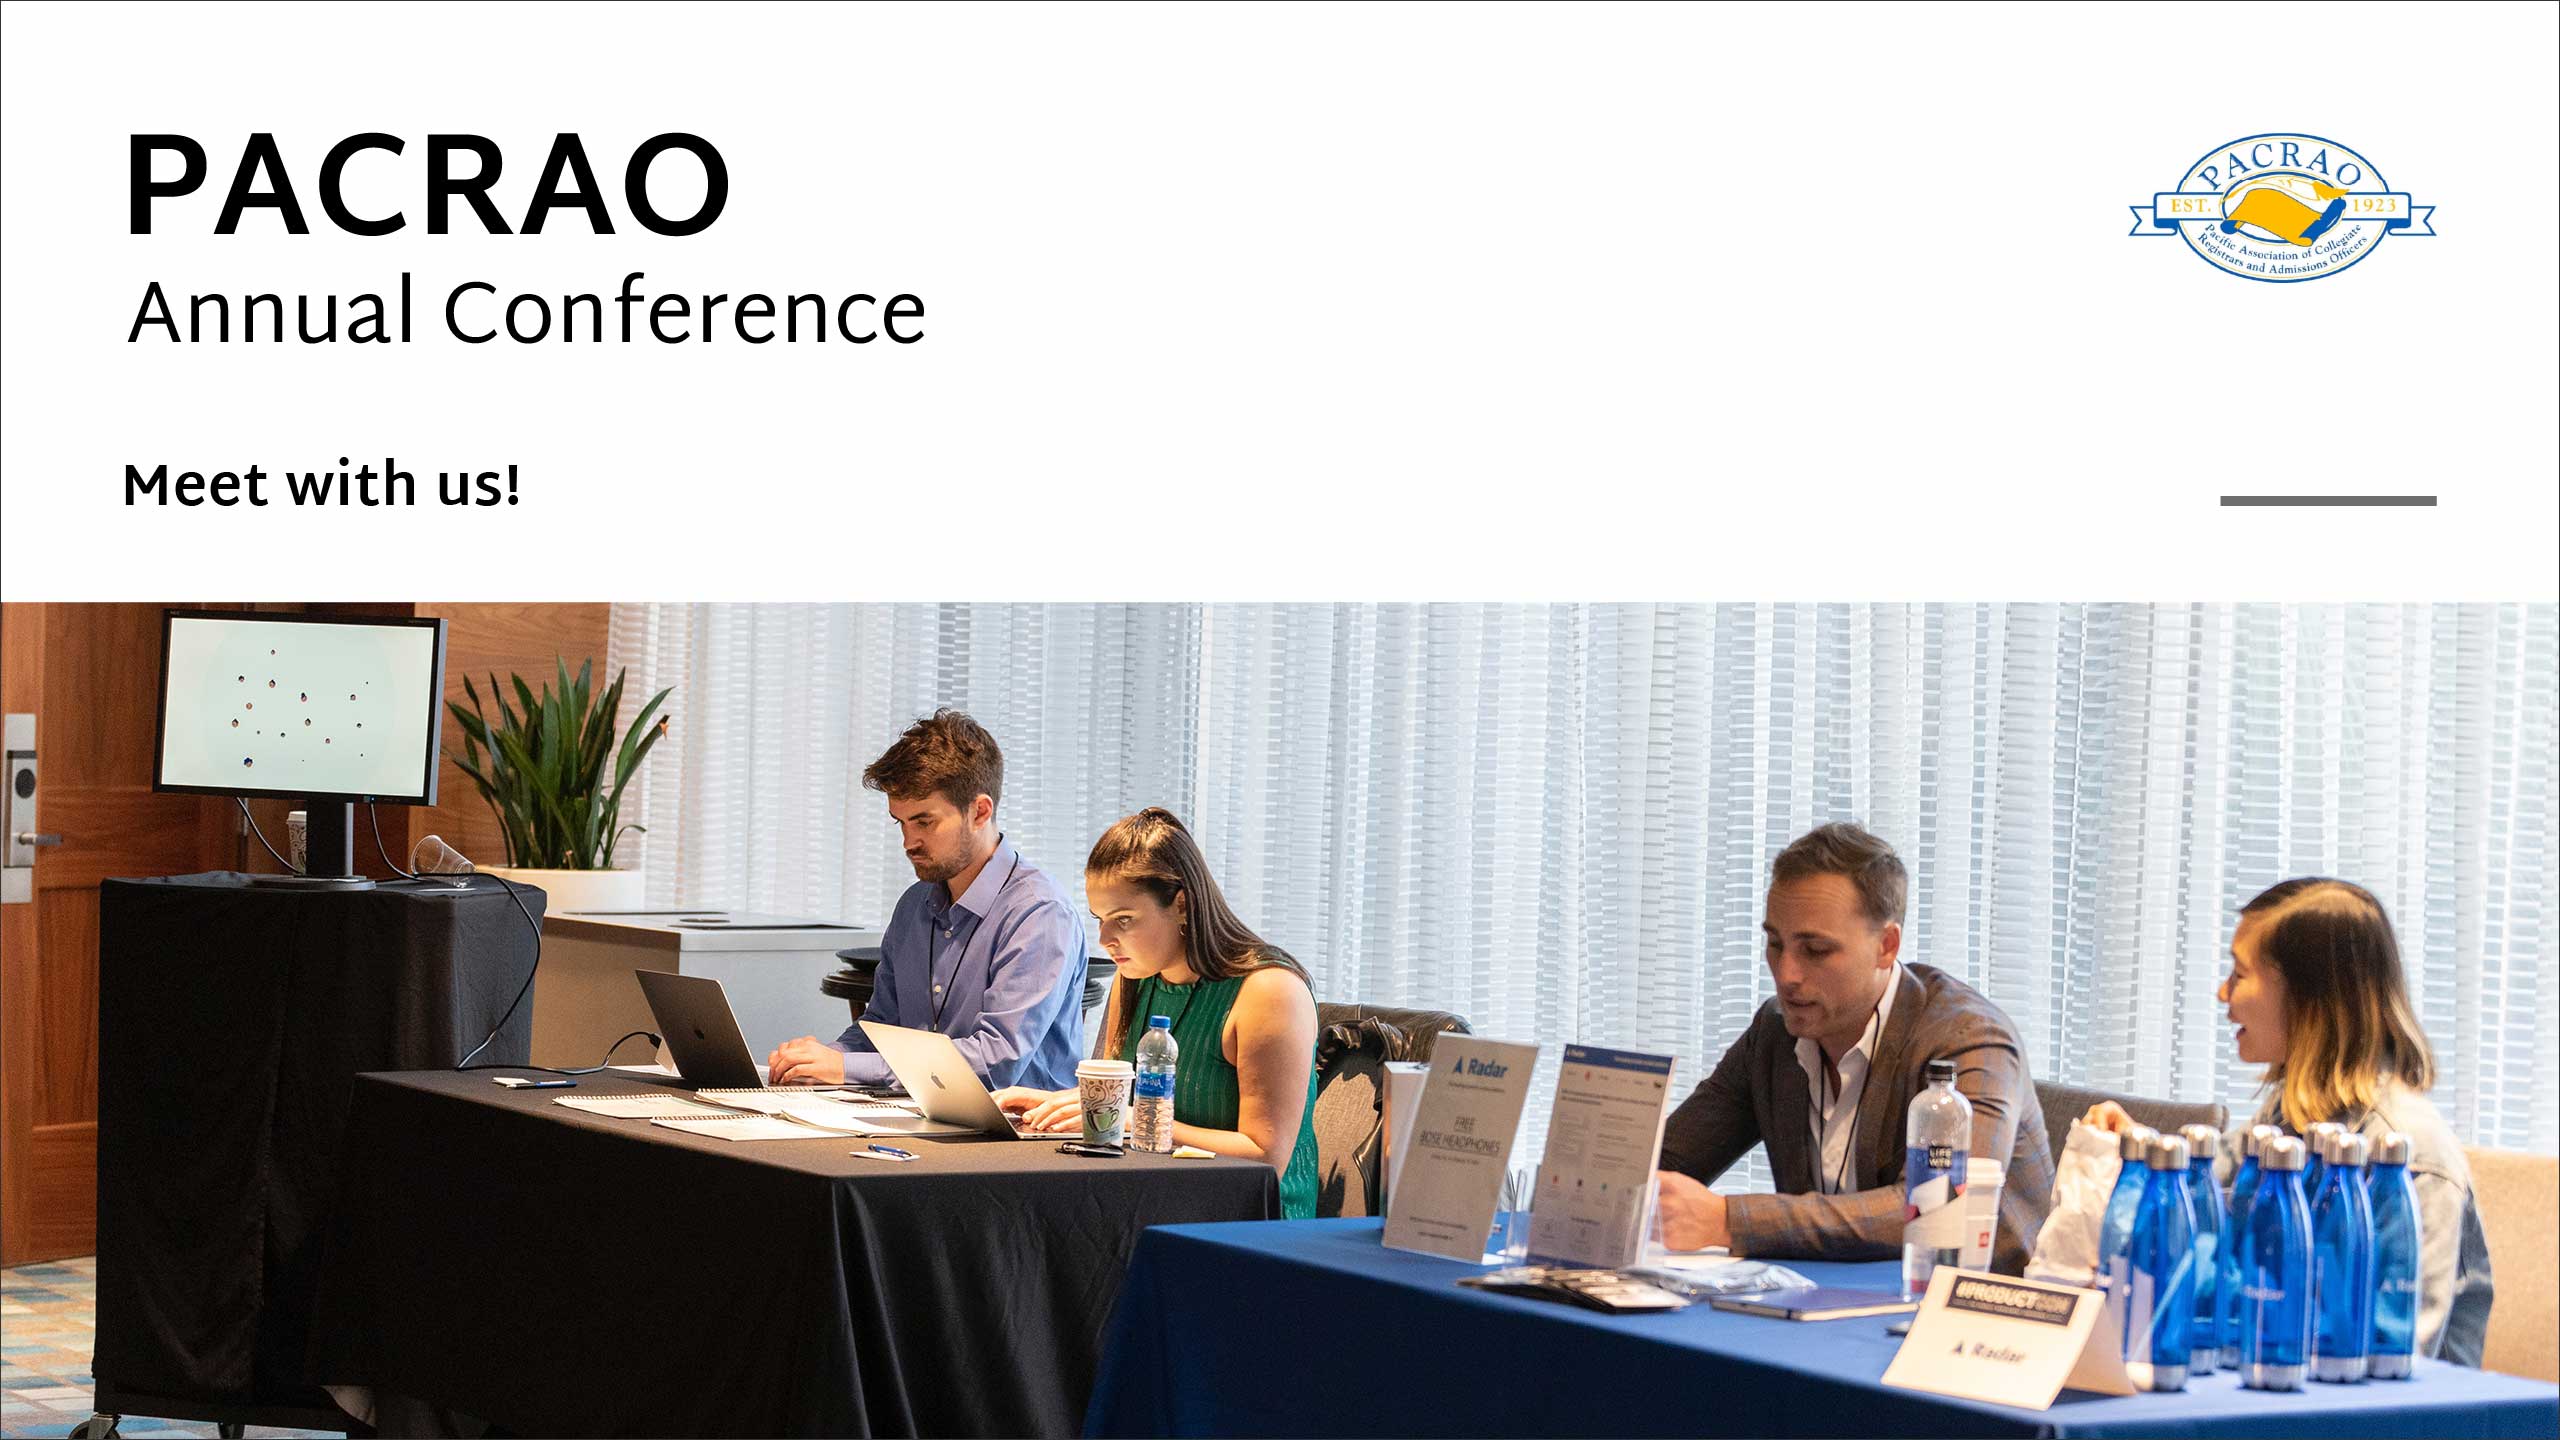 PACRAO Annual Conference